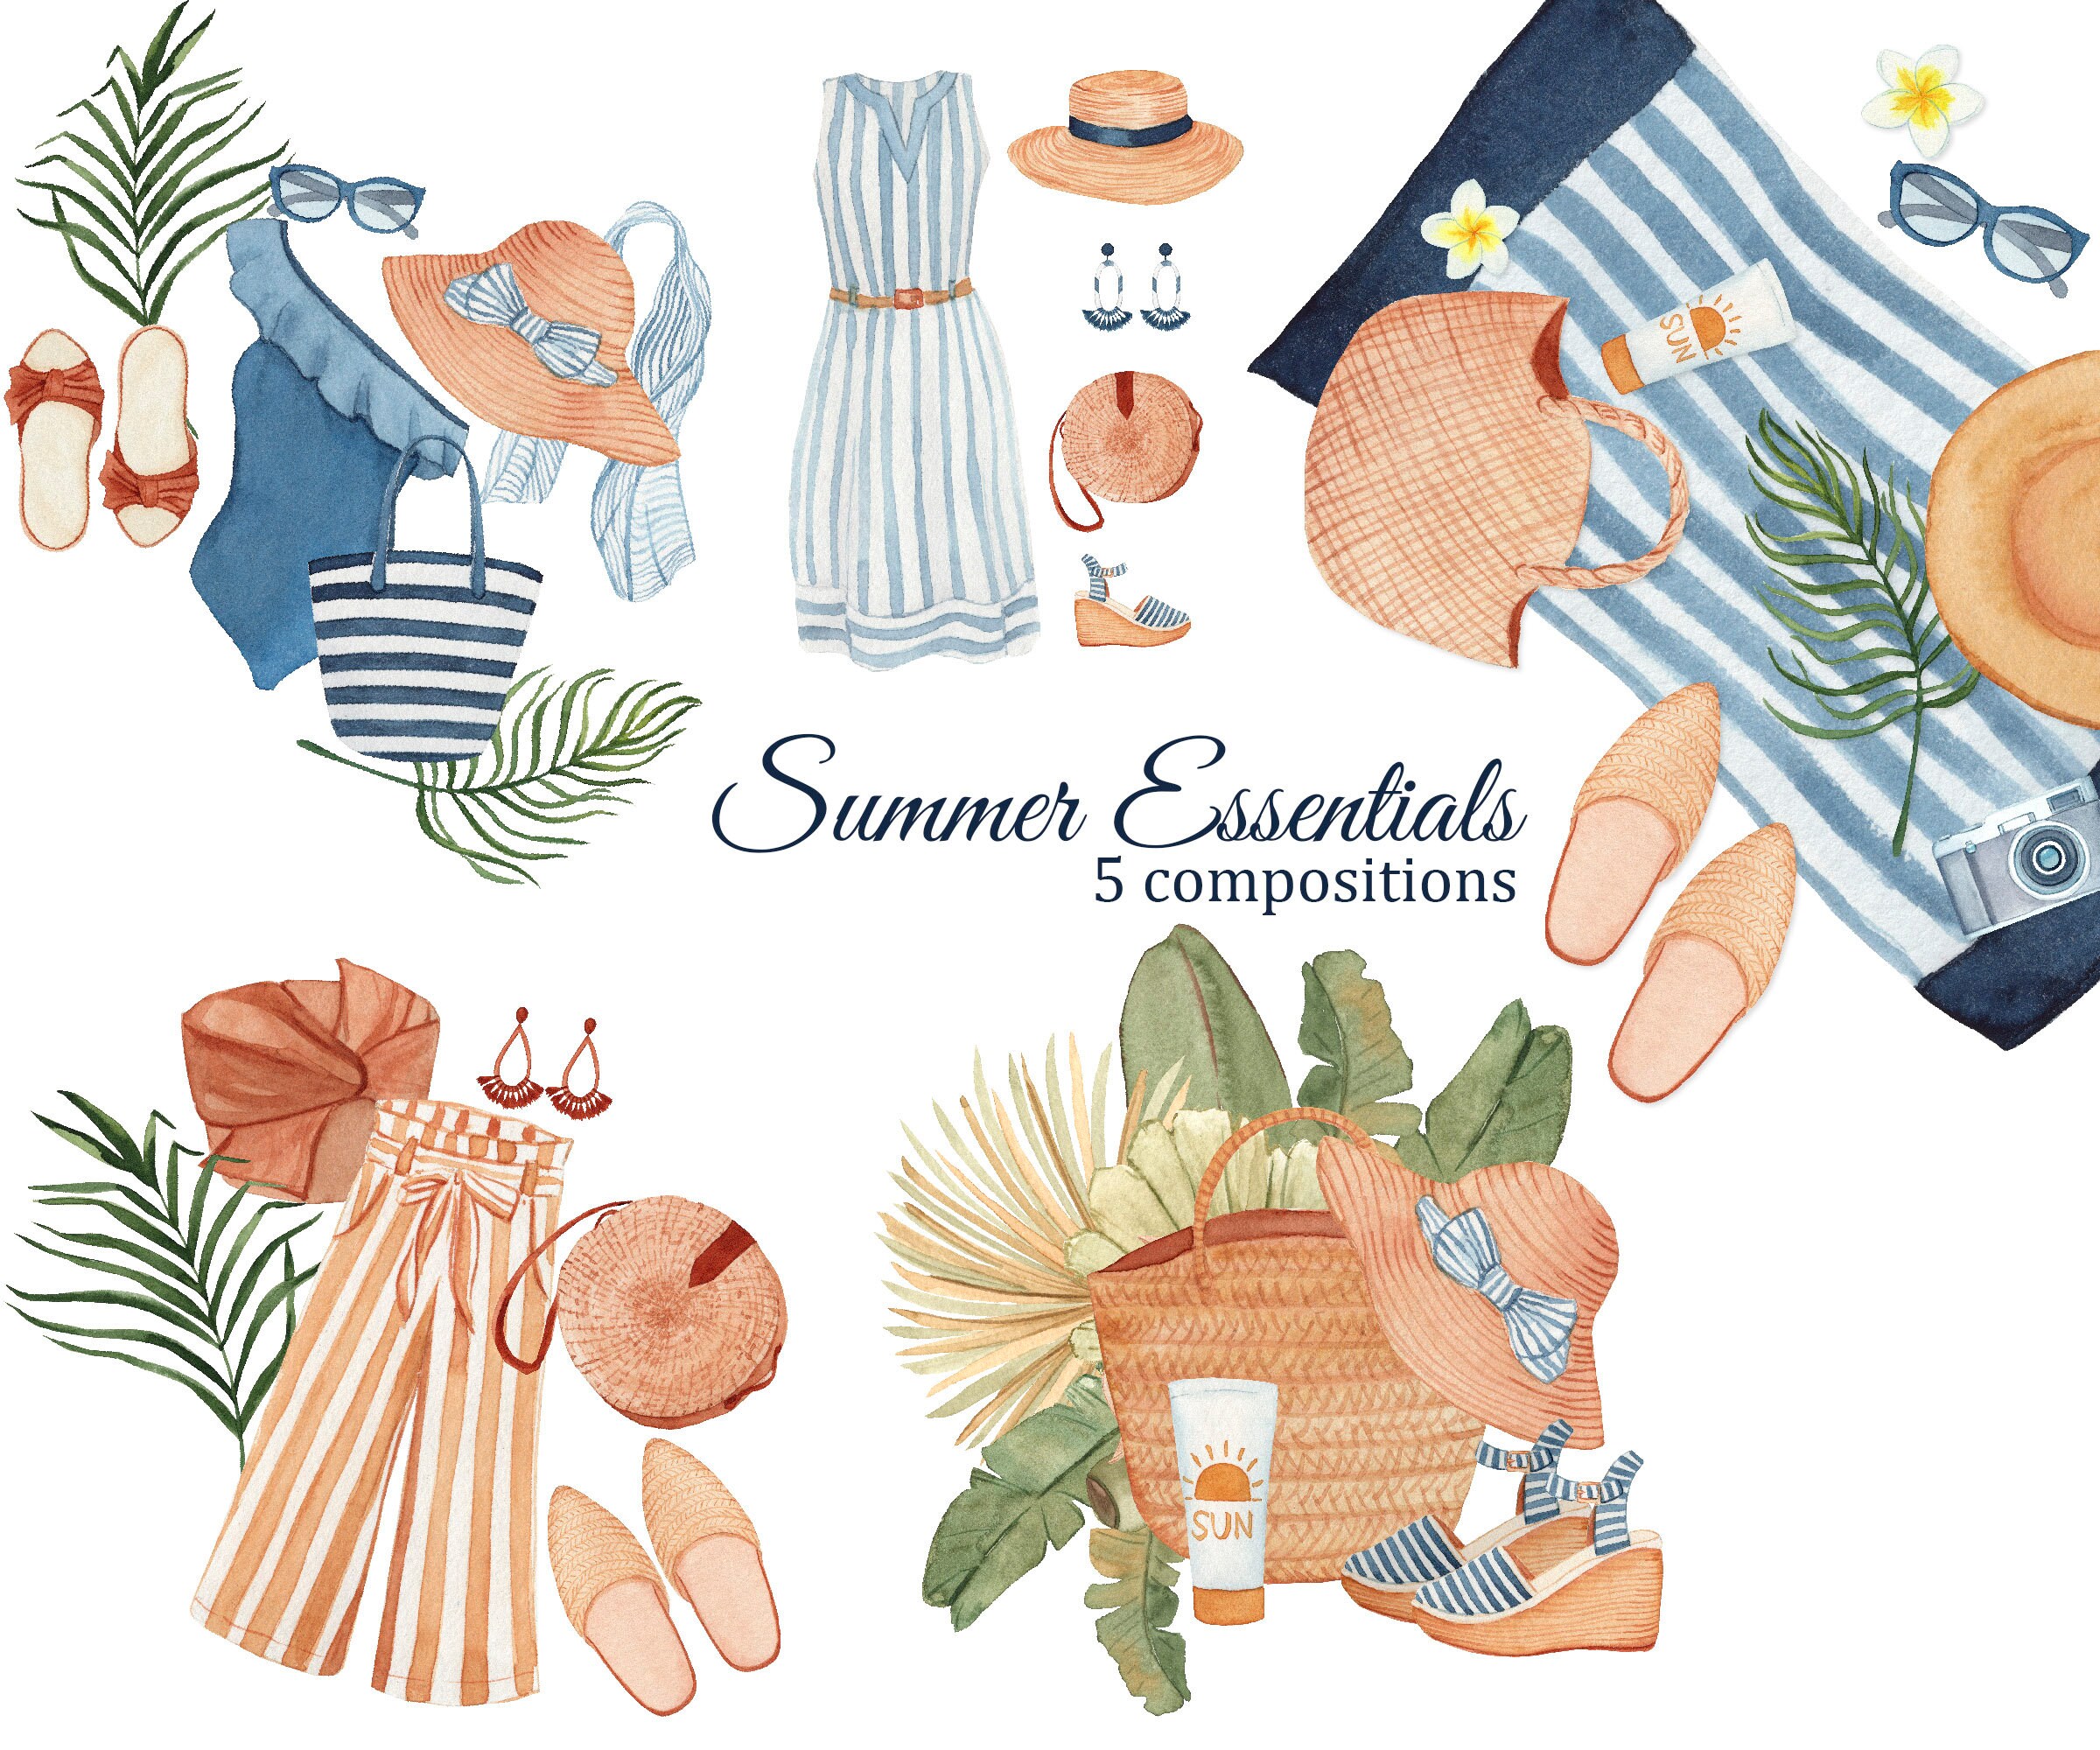 SUMMER Fashion Watercolor, Summer outfits collection for blog,  magazine,essentials, boho outfits, clothes, shoes dresses Clipart digital  PNG